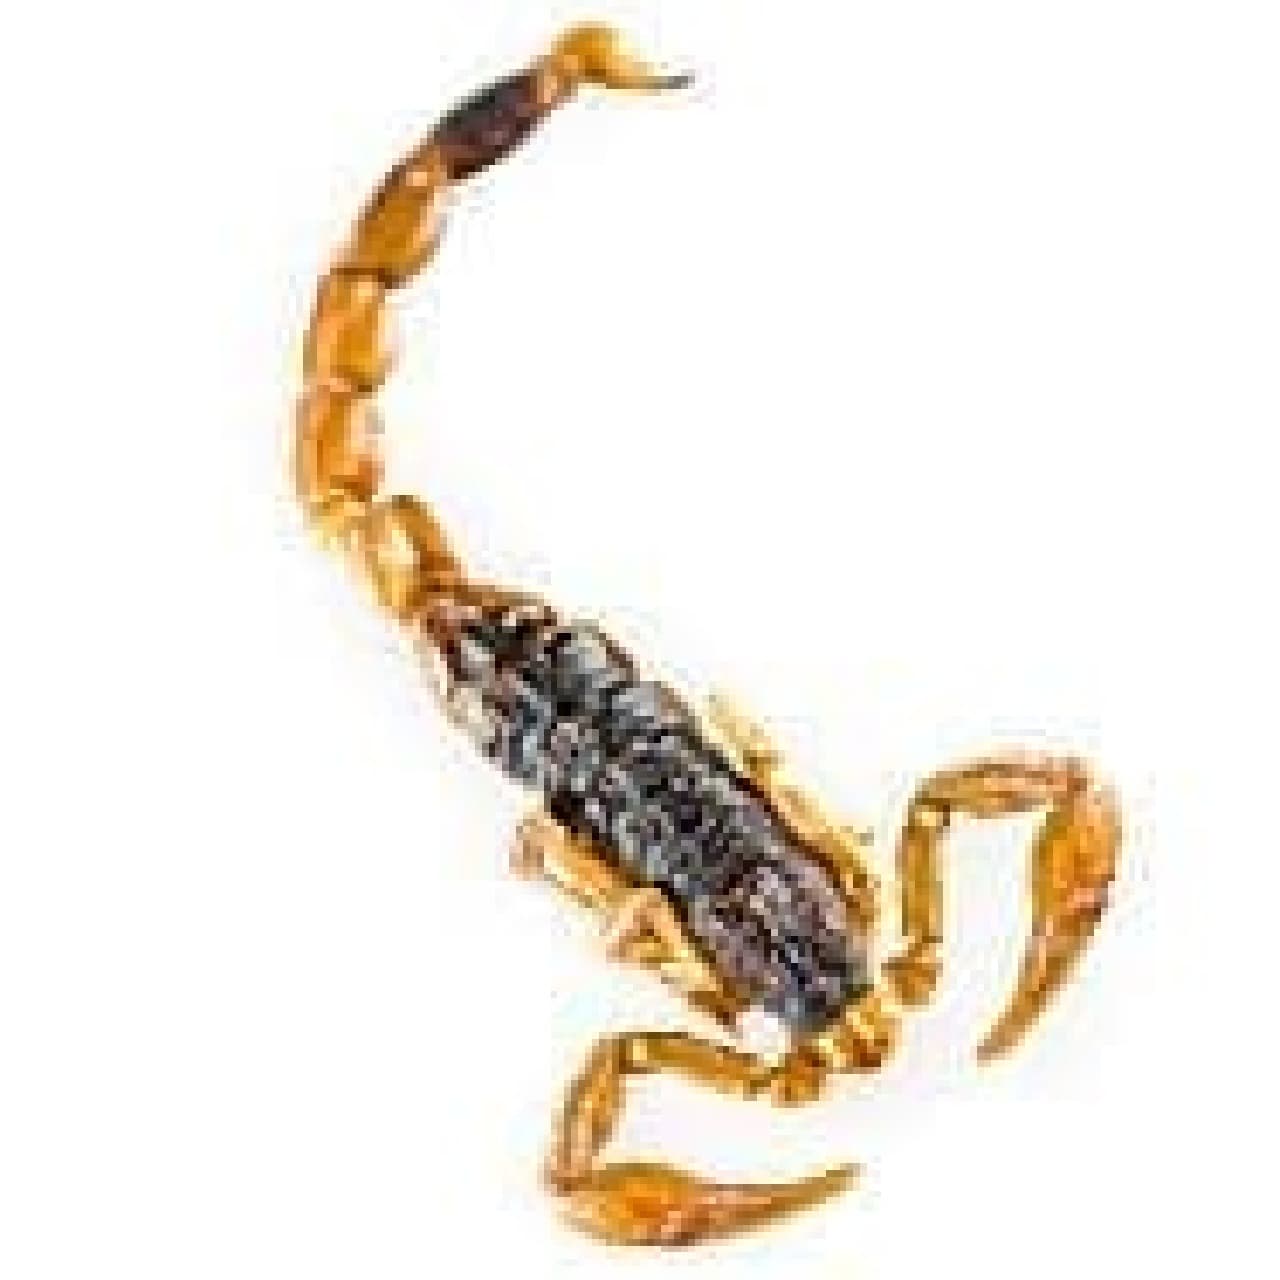 There are 5 such scorpions!